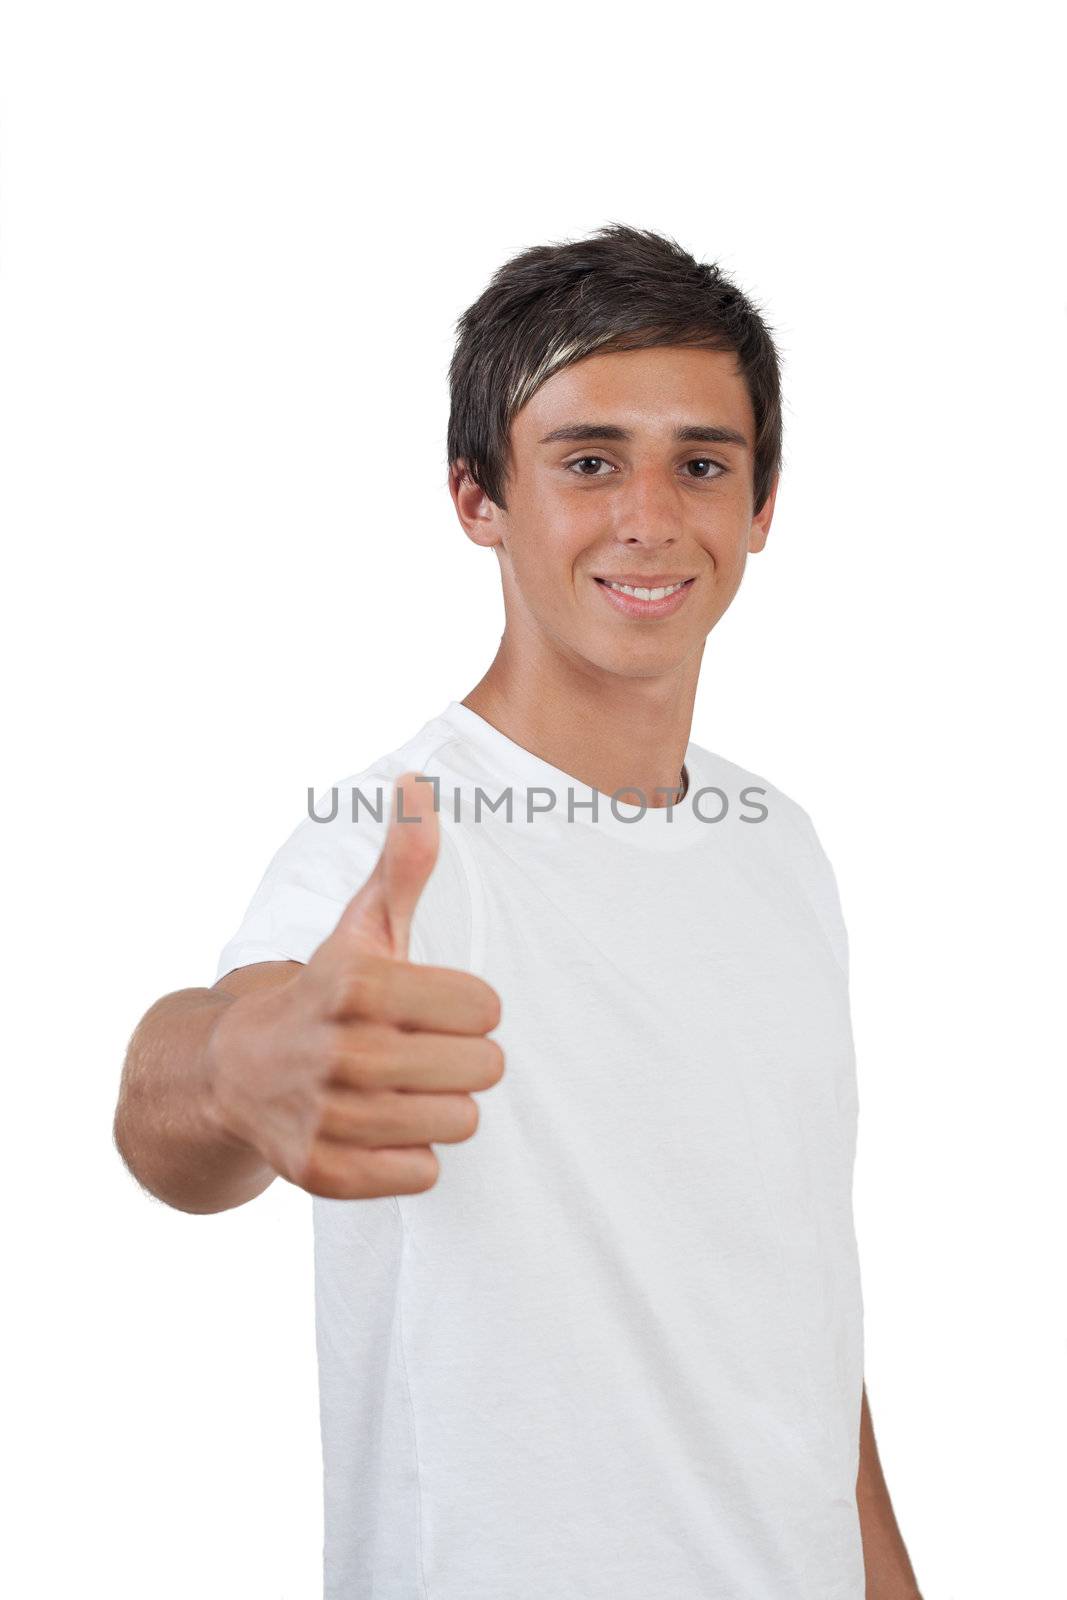 young swarthy man with brown eyes gives the thumbs up gesture on white background